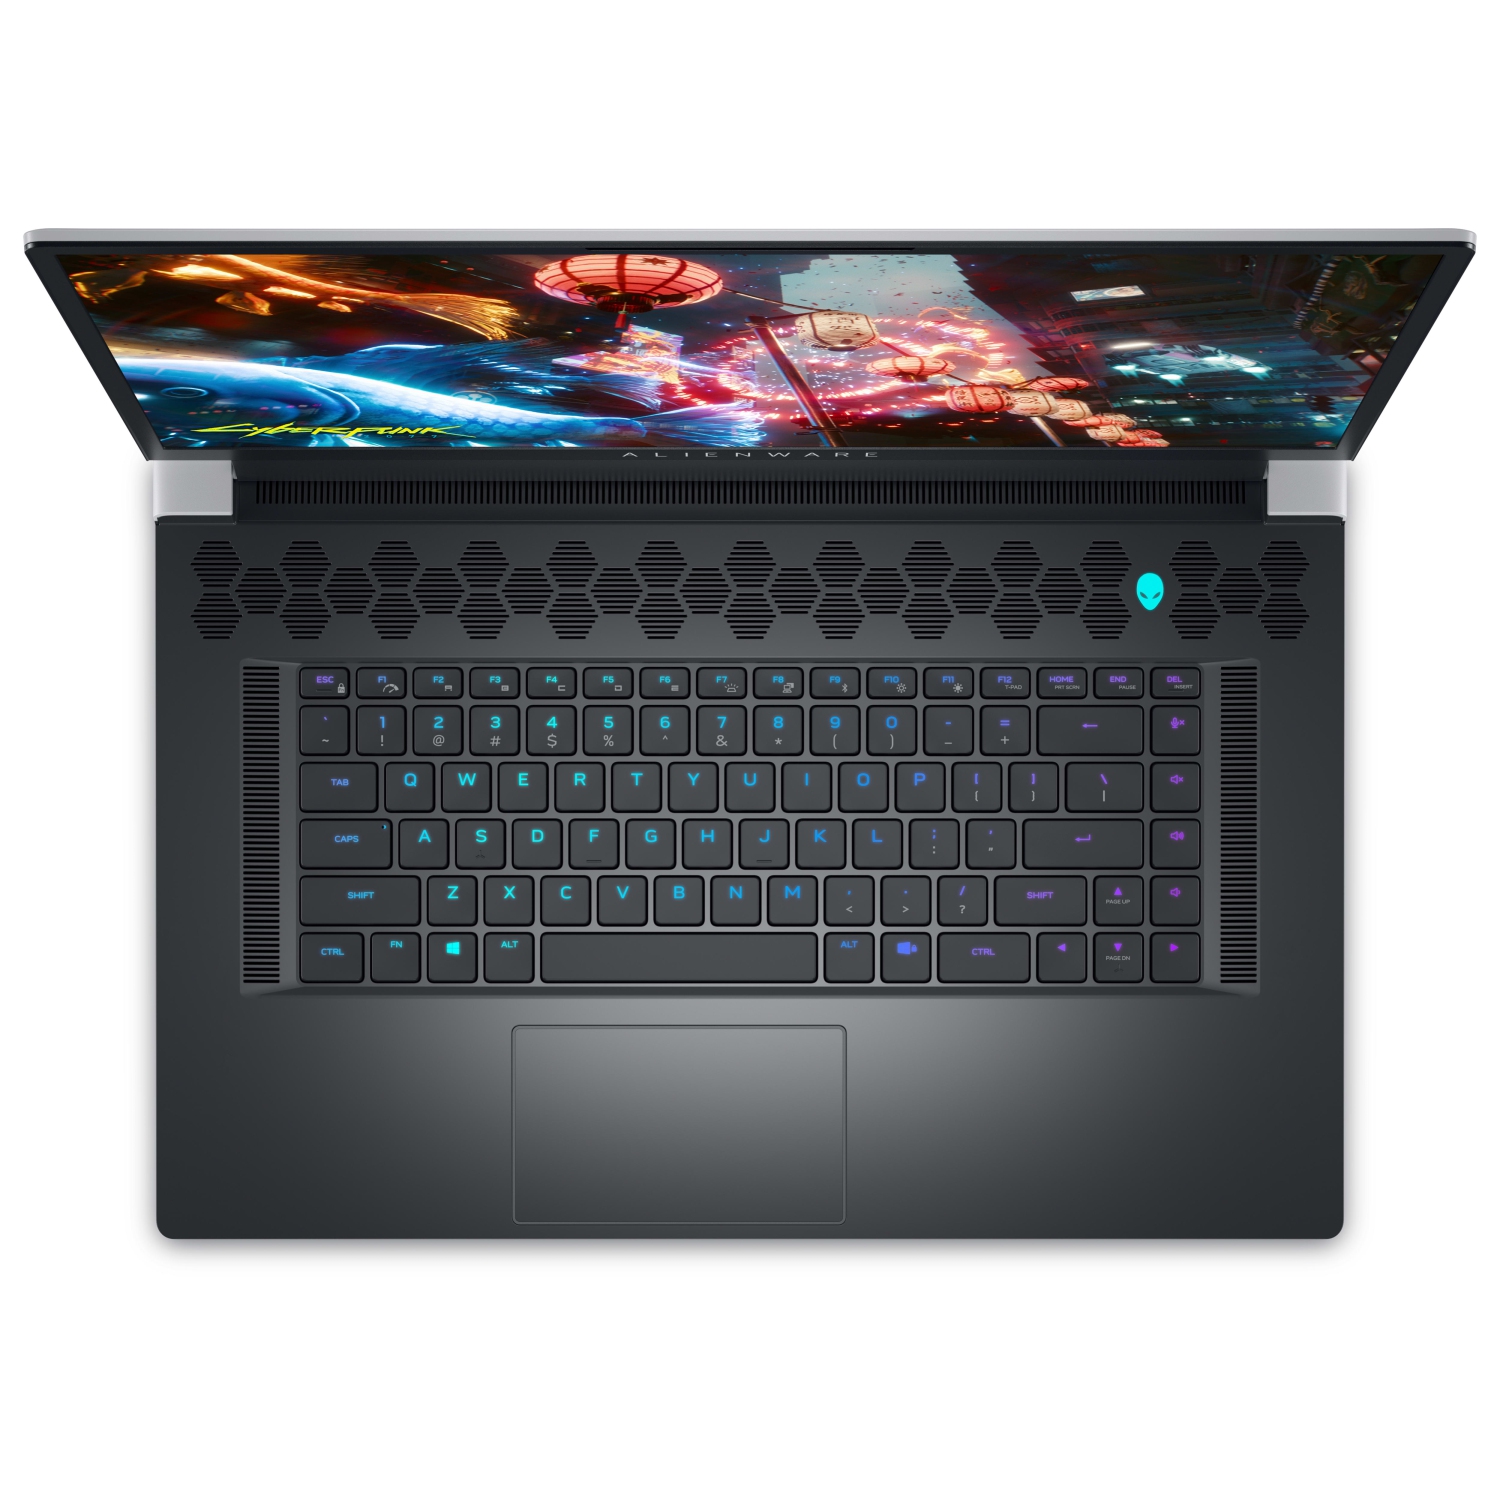 Refurbished (Excellent) – Dell Alienware X17 R2 Gaming Laptop (2022) | 17.3" FHD | Core i9 - 1TB SSD - 32GB RAM - 3070 Ti | 14 Cores @ 5 GHz - 12th Gen CPU - 8GB GDDR6X